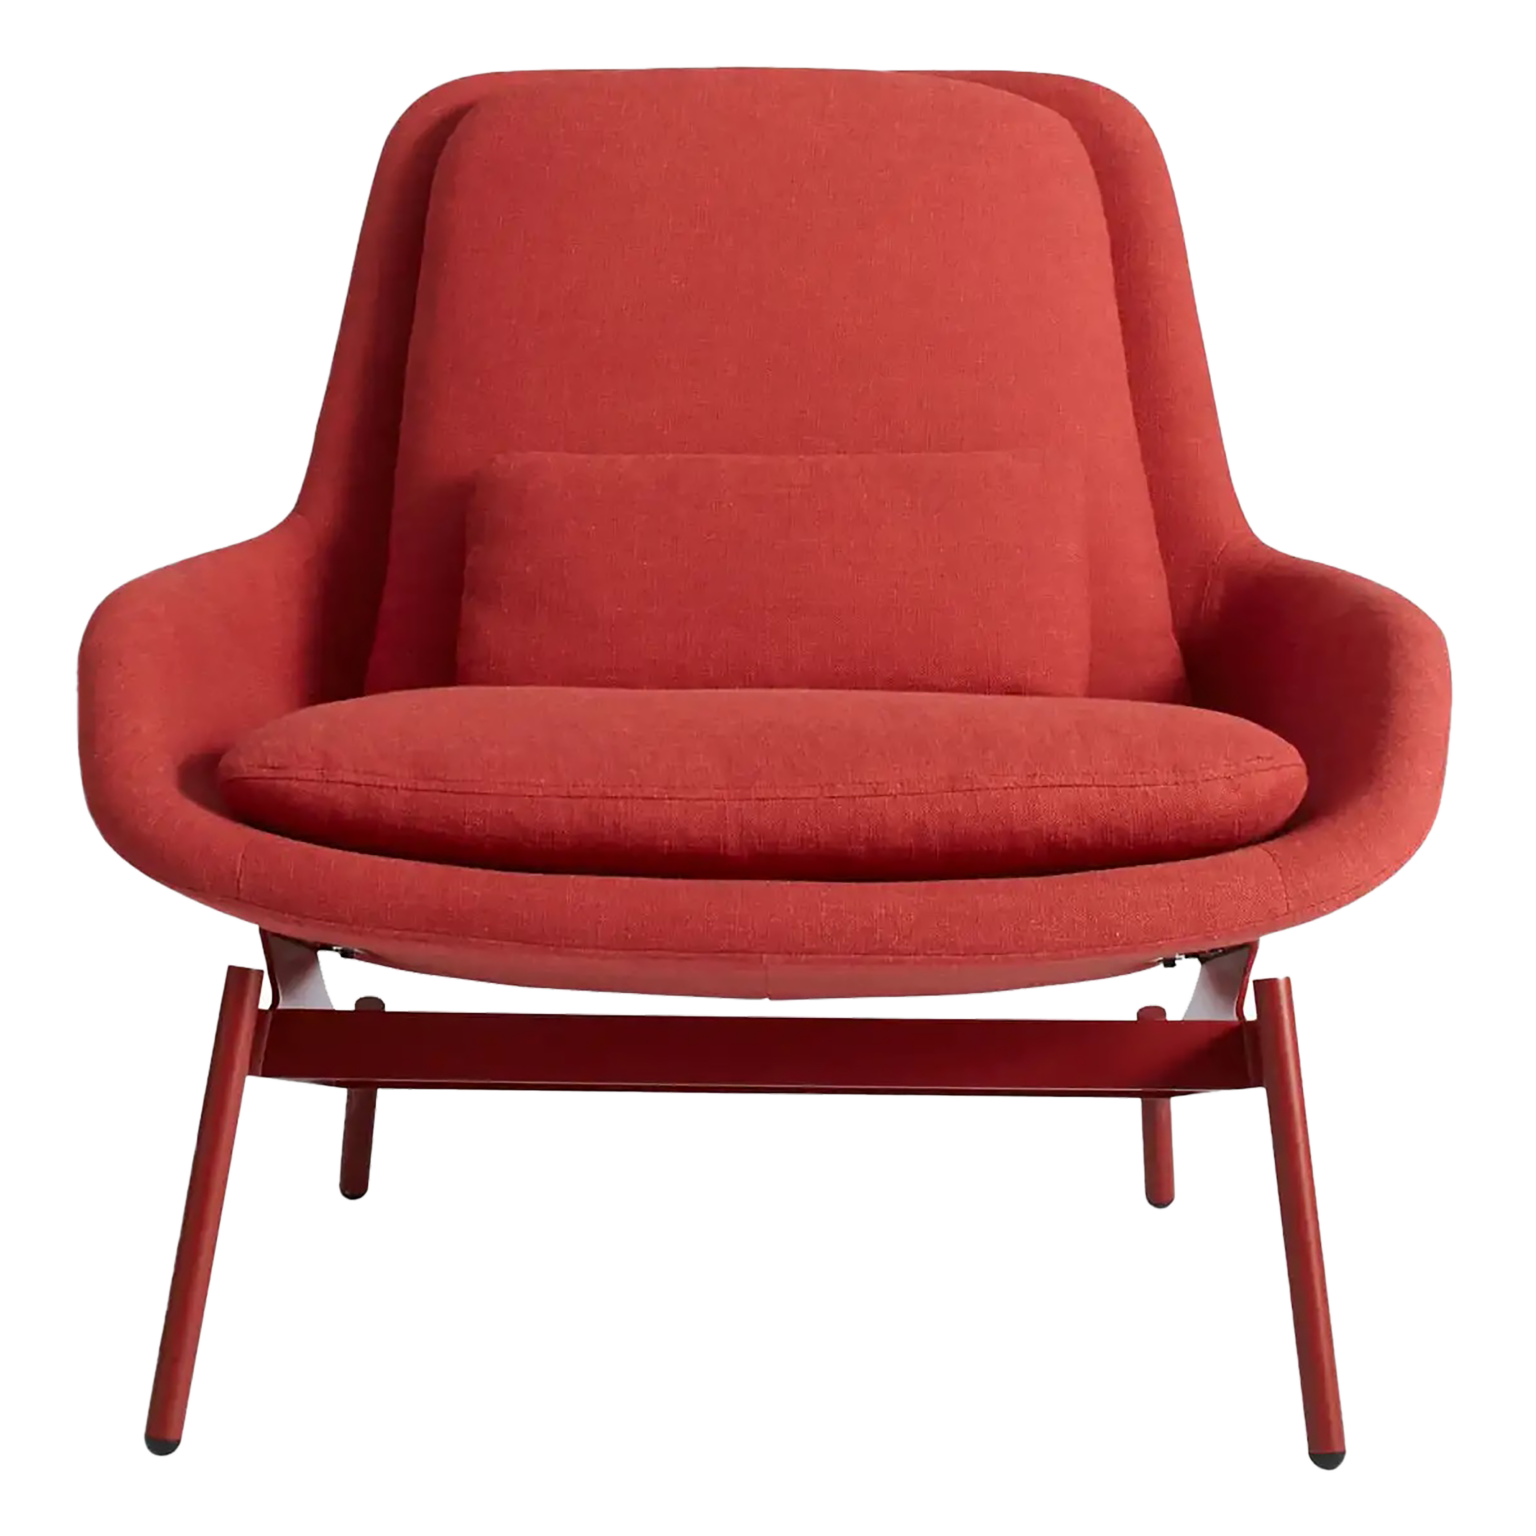 featured in the Russell nashville: a big wooden, red lounge chair with a. little pillow